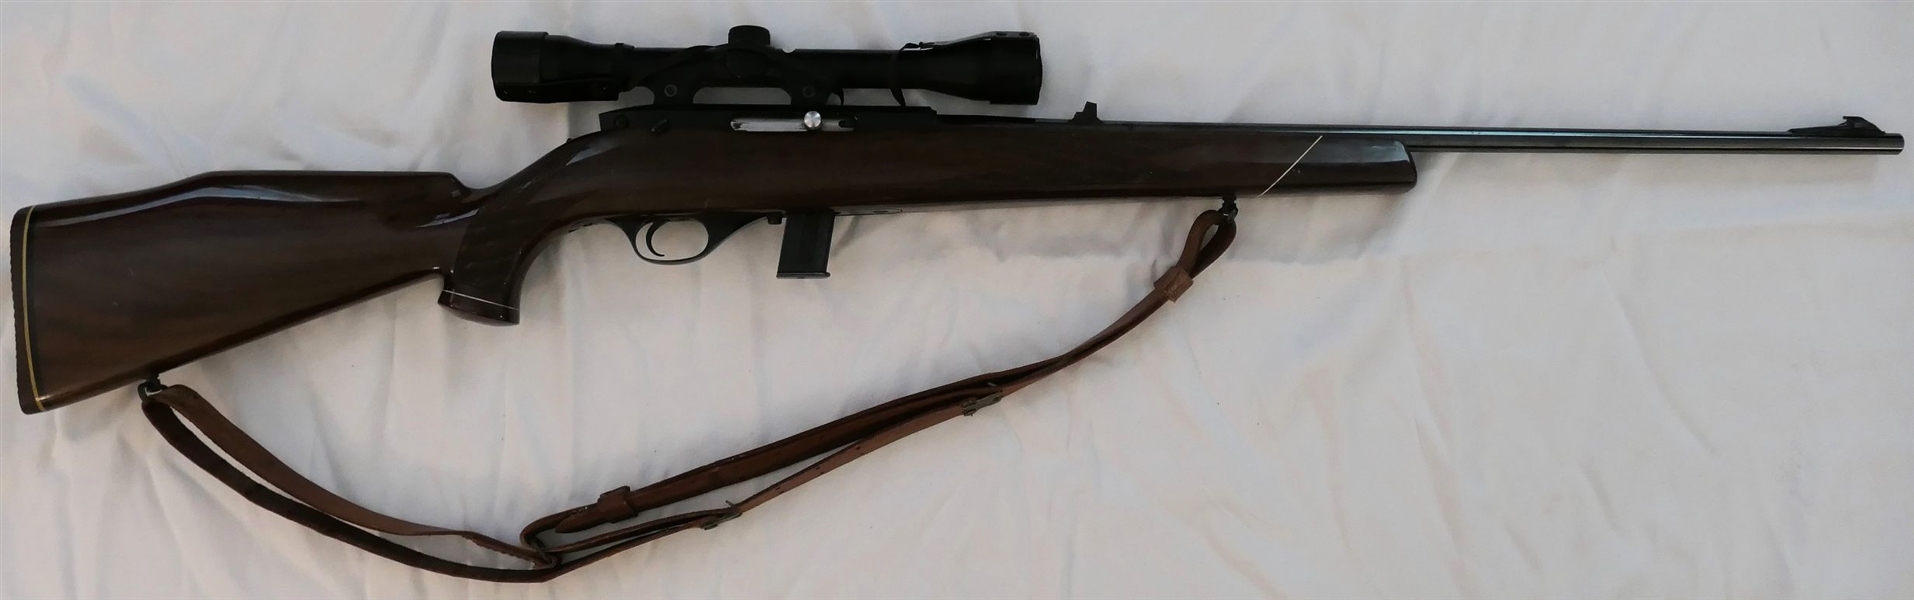 Weatherby .22 Long Automatic - 4x50 Mark XXII Weatherby Scope - Monte Carlo Scope - Made in Japan  - With Leather Strap 